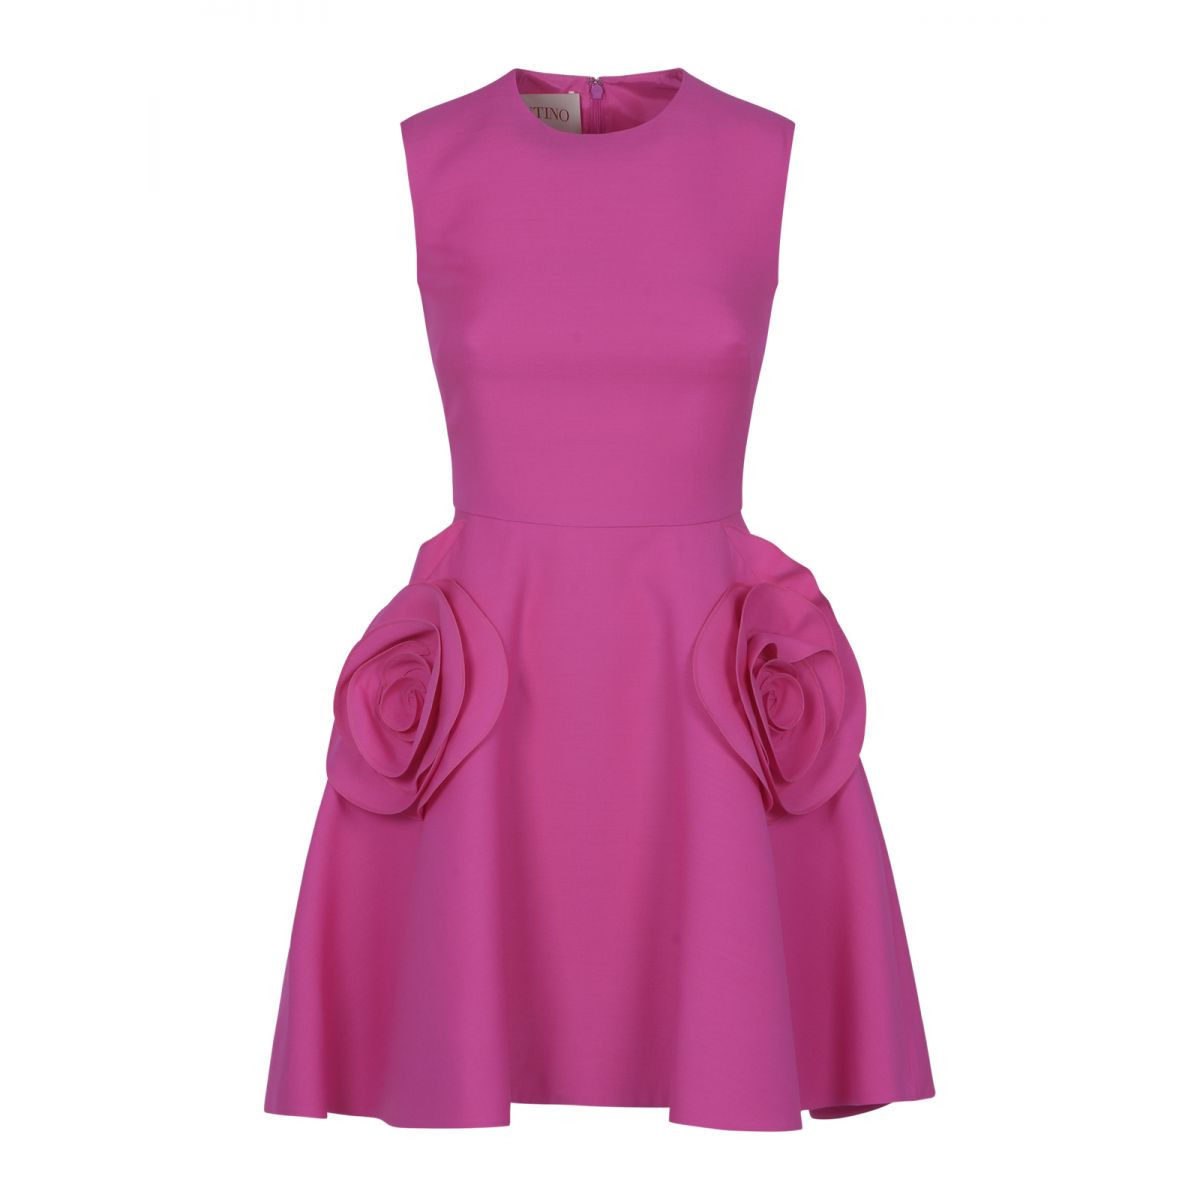 Valentino - Fuchsia dress with roses details